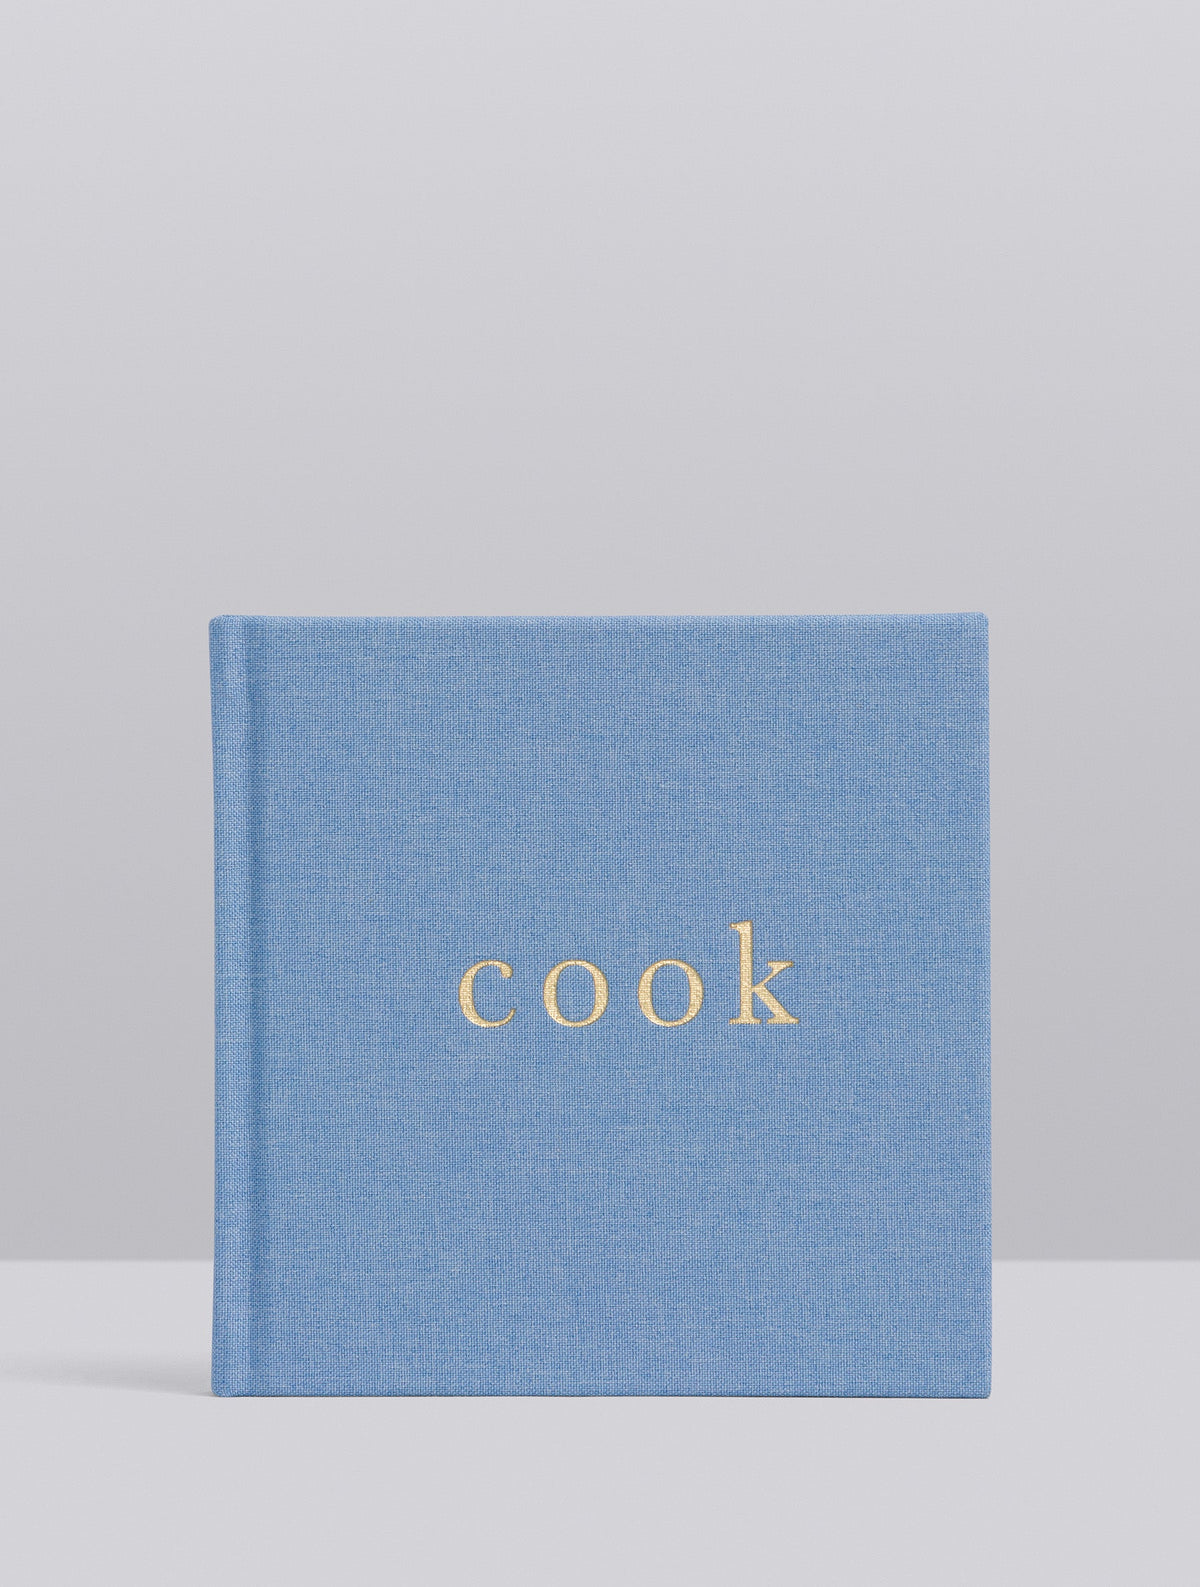 Cook. Recipes To Cook. Vintage Blue